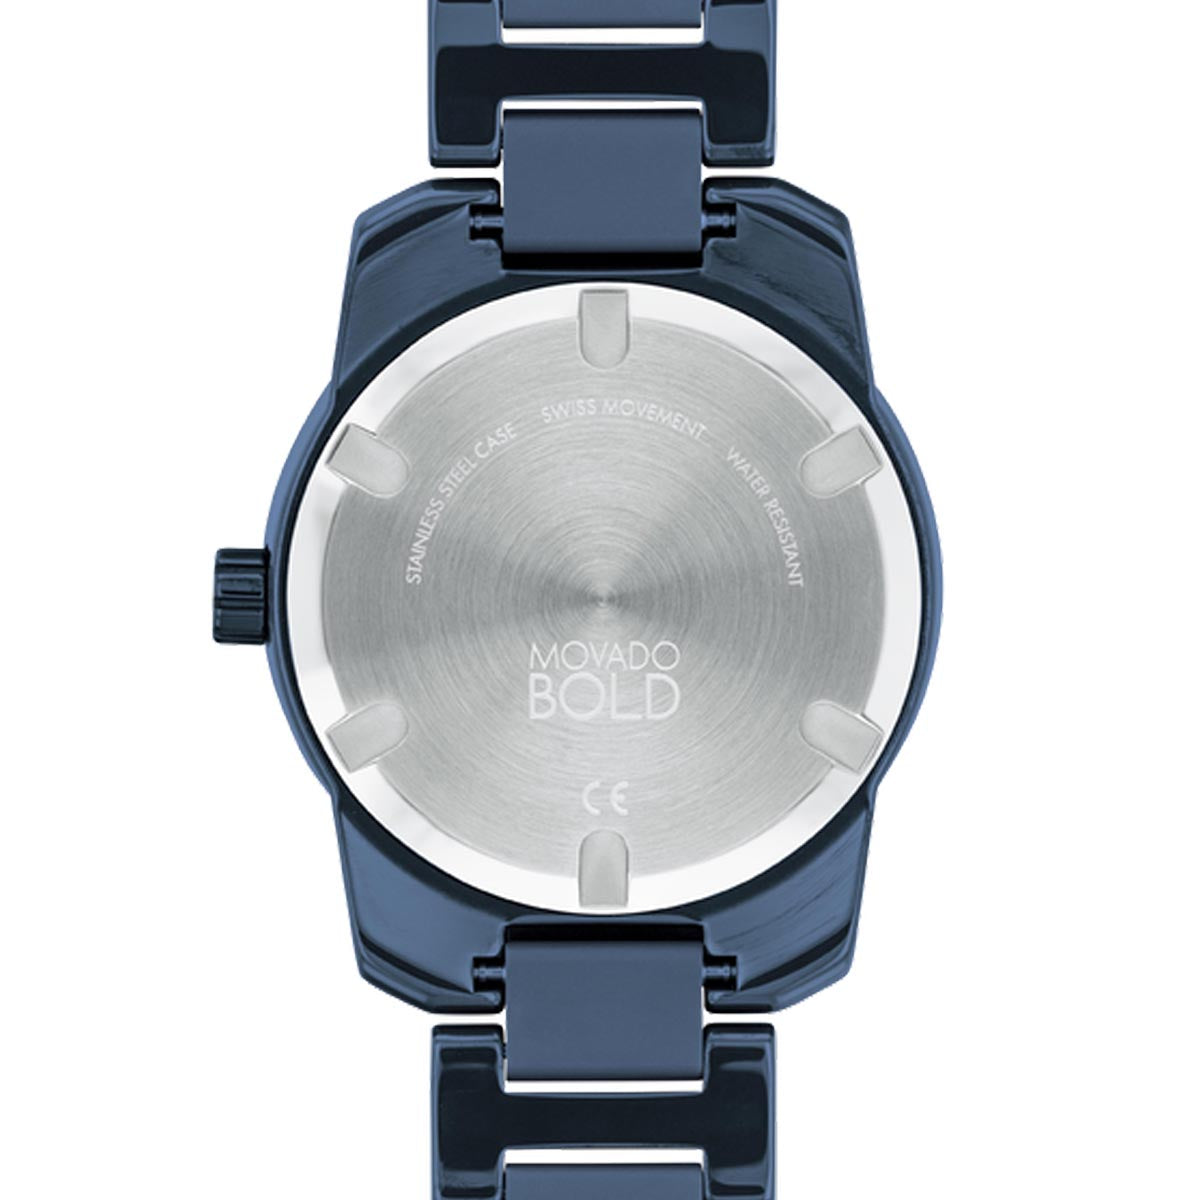 Movado Bold Verso Mens Watch with Black Dial and Blue Ceramic